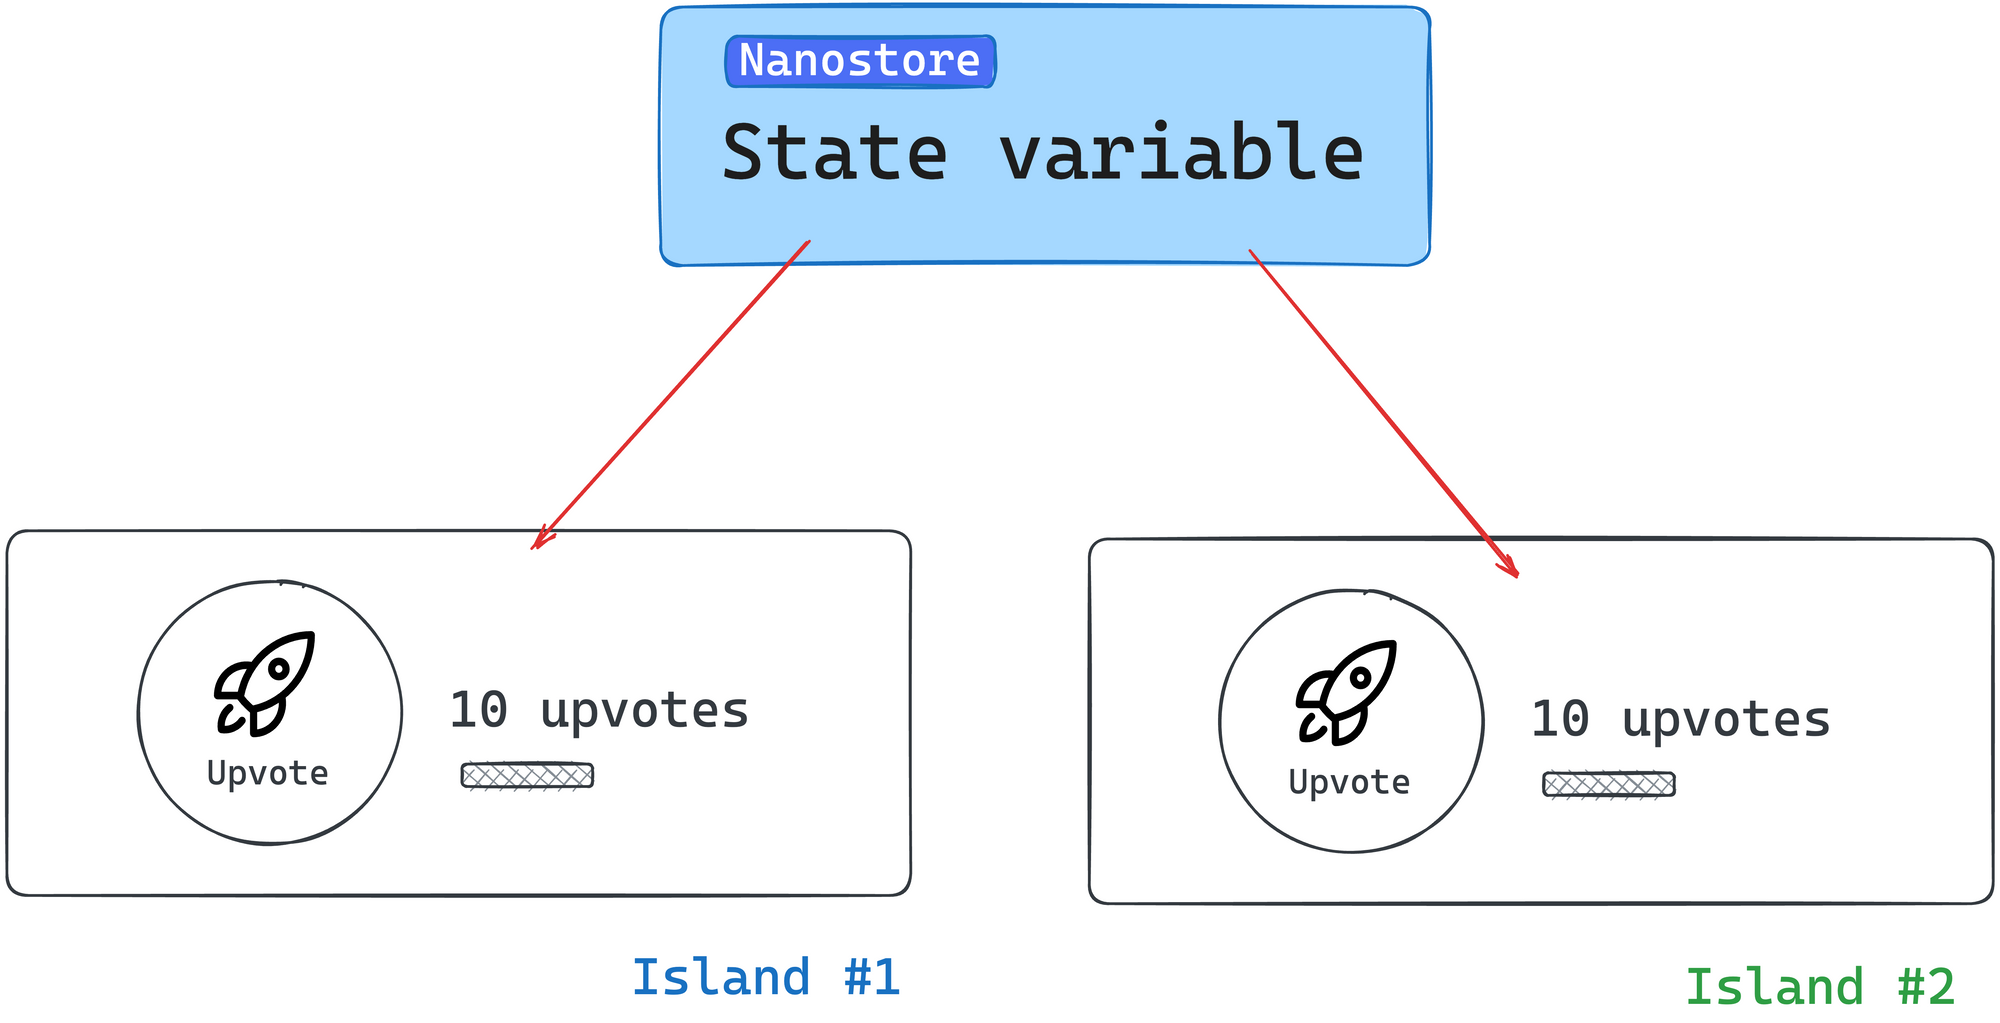 Propagating state variables from nanostore.